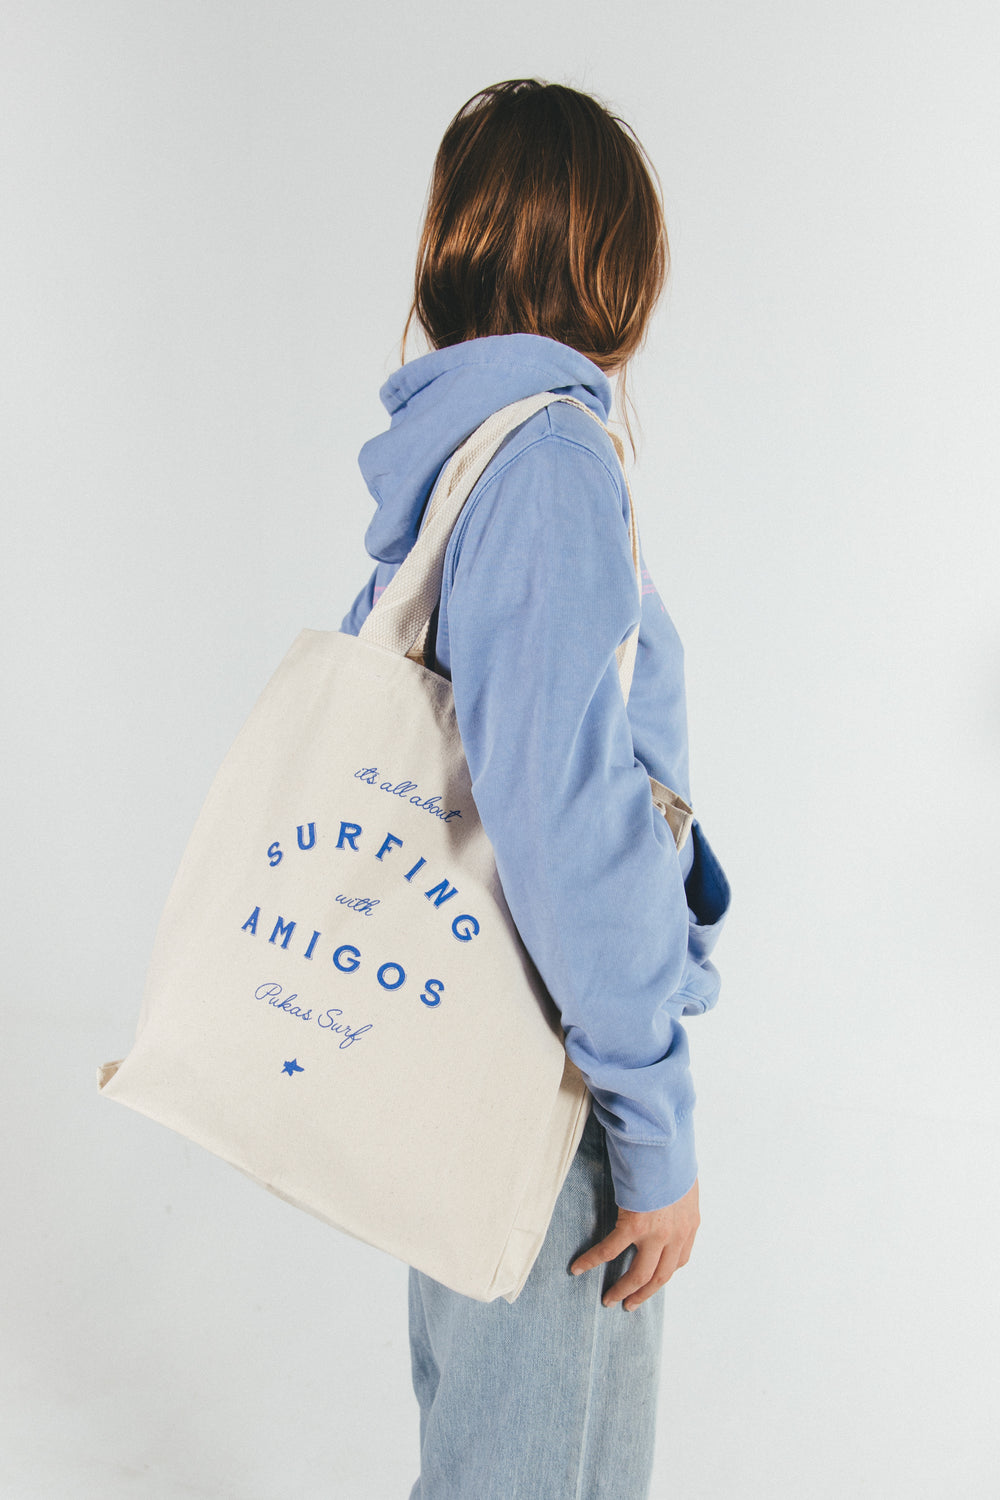 PUKAS-SURF-SHOP-TOTE-BAG-SURFING-THE-BASQUE-COUNTRY-SURFING-WITH-AMIGOS-BLUE